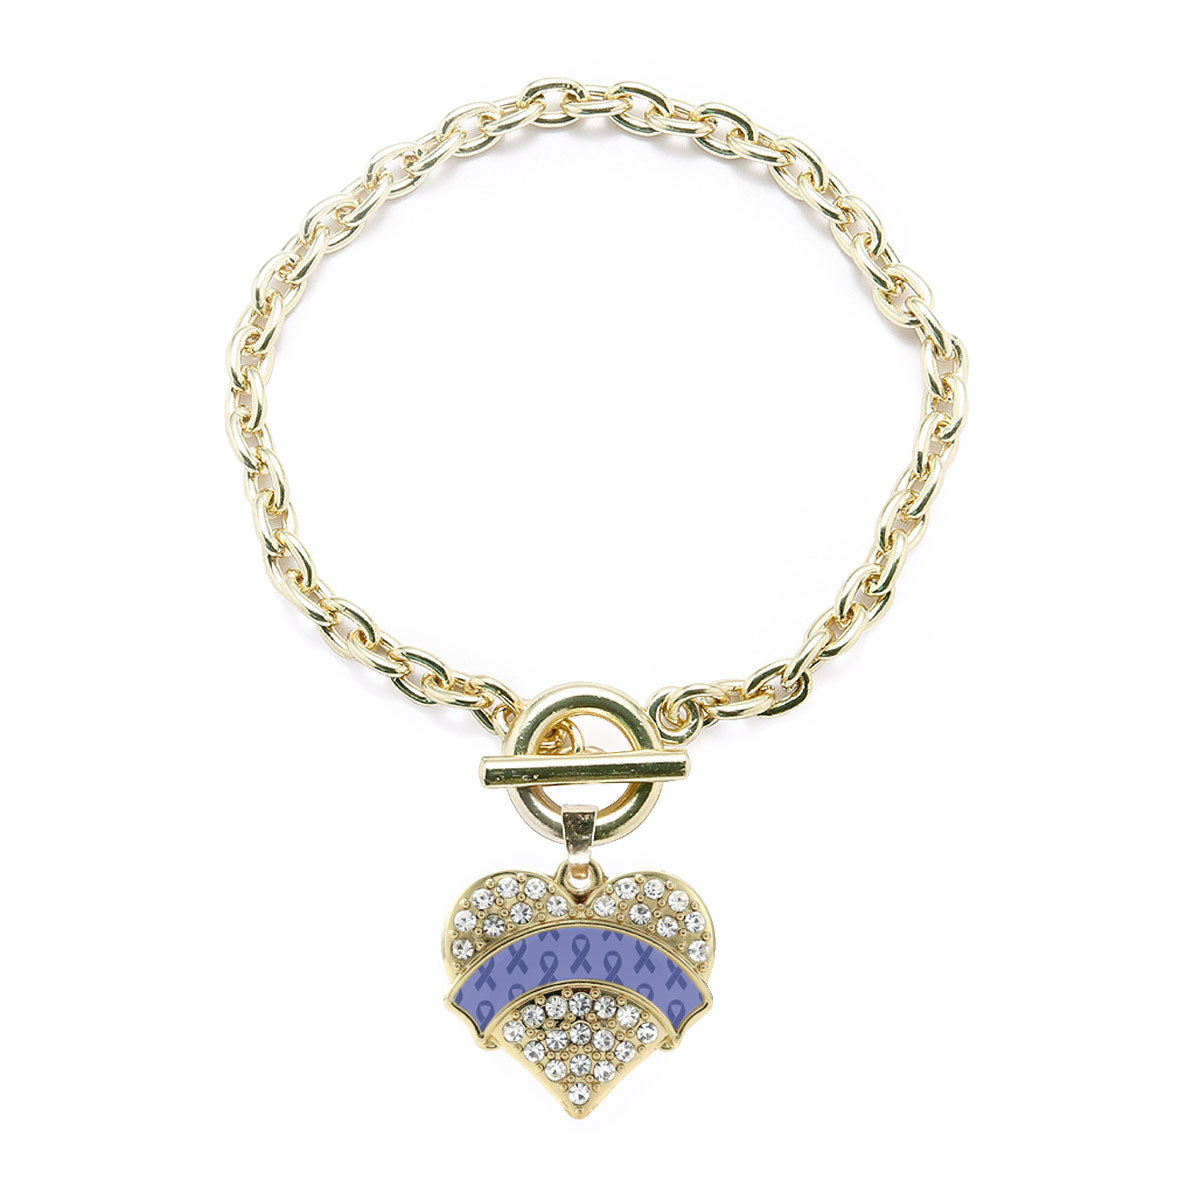 Gold Periwinkle Ribbon Support Pave Heart Charm Toggle Bracelet